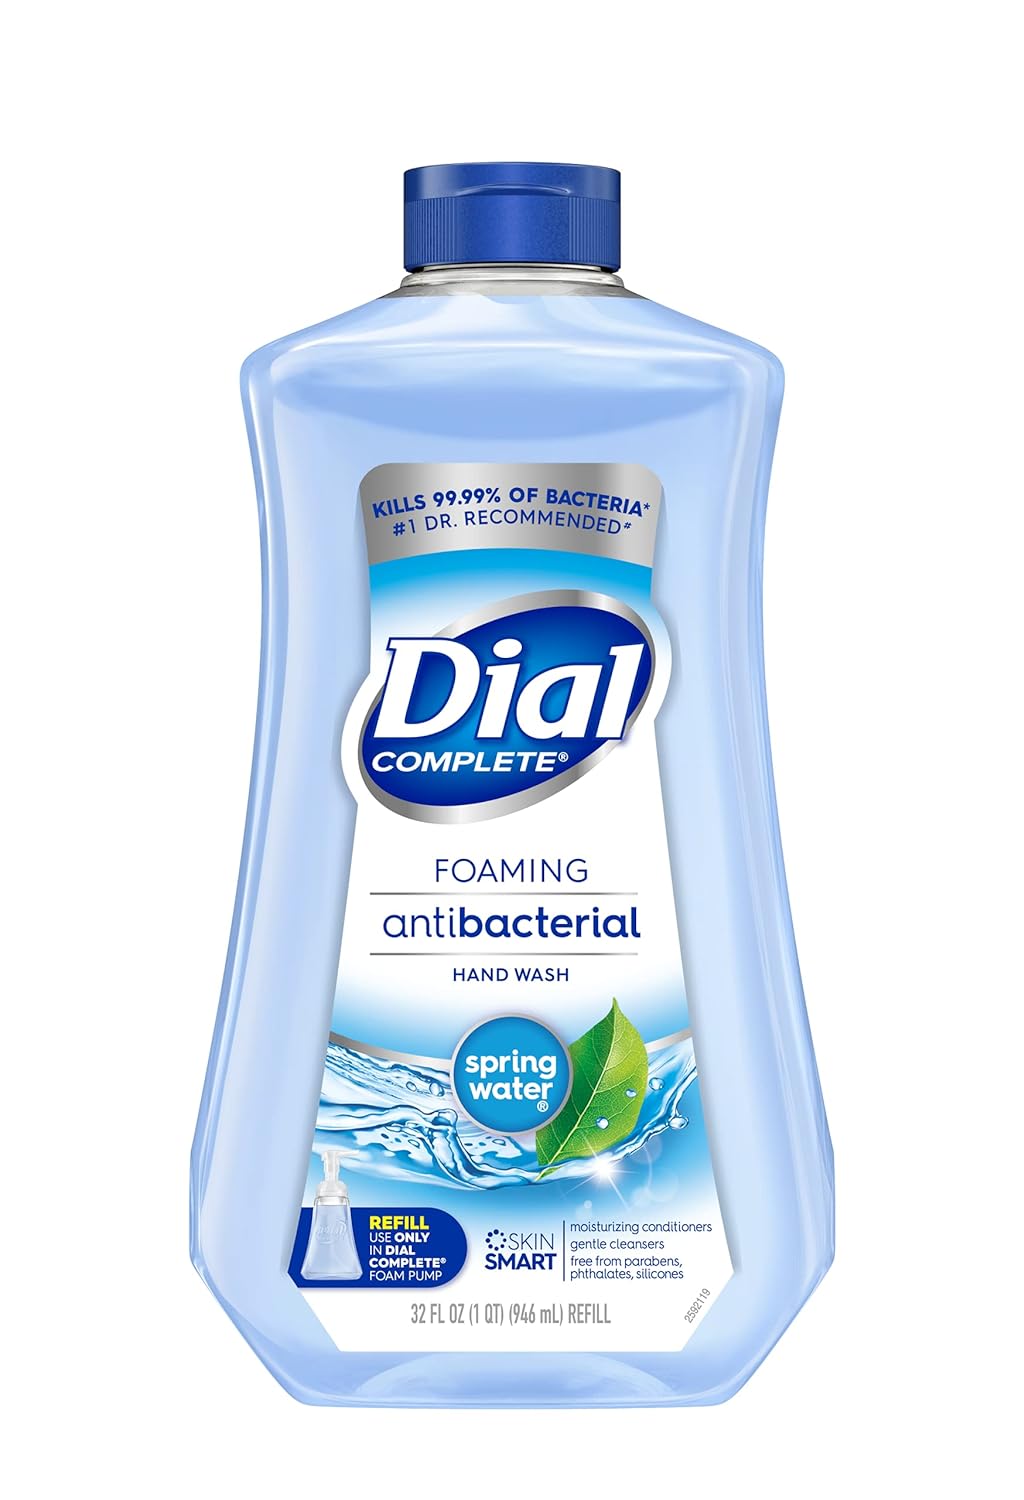 Dial Complete Antibacterial Foaming Hand Soap Refill